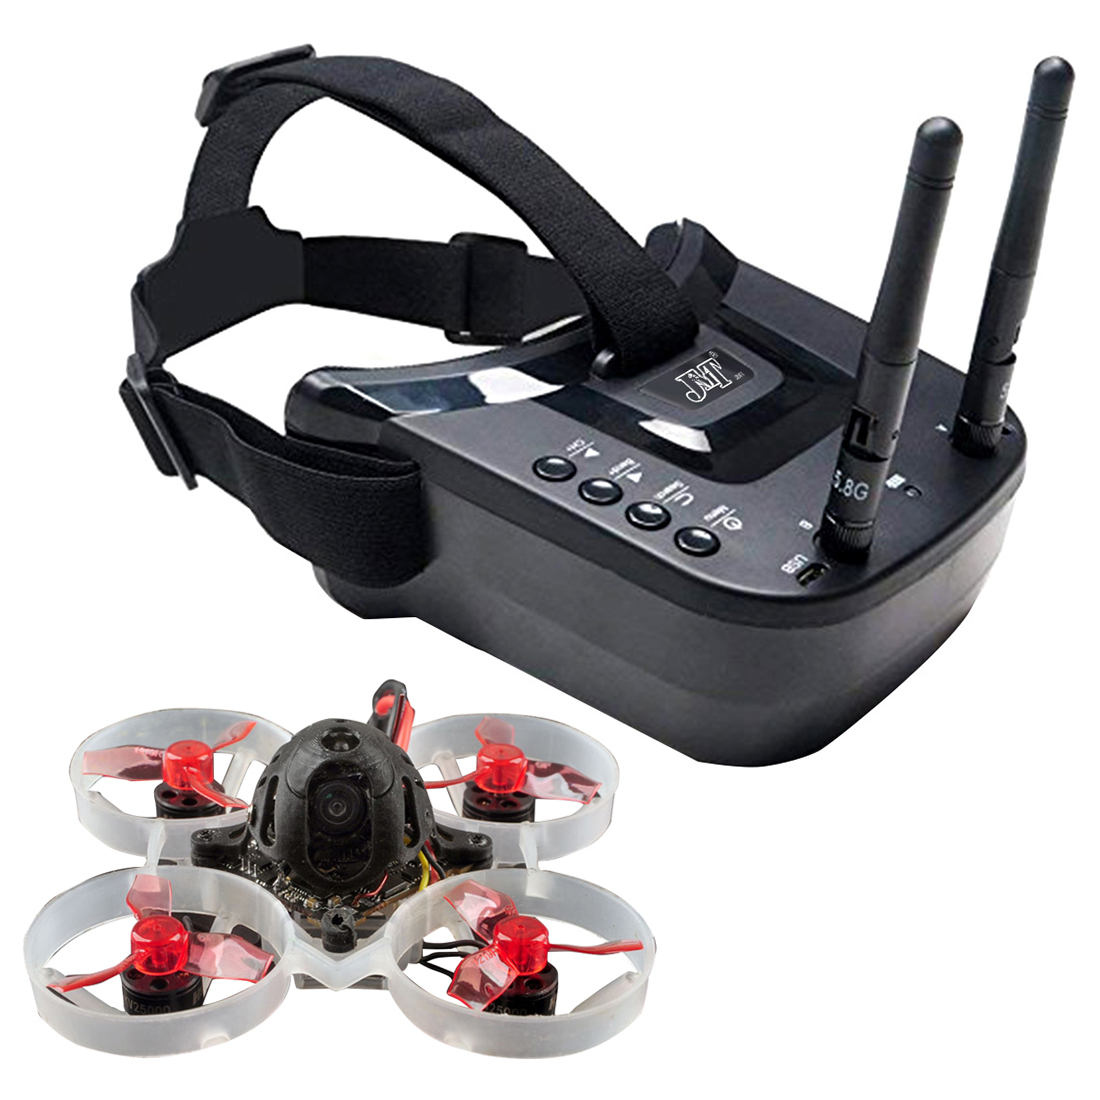 US$ 21.61 - JMT RC Drone Combination kit 3inch 480 x 320 Display